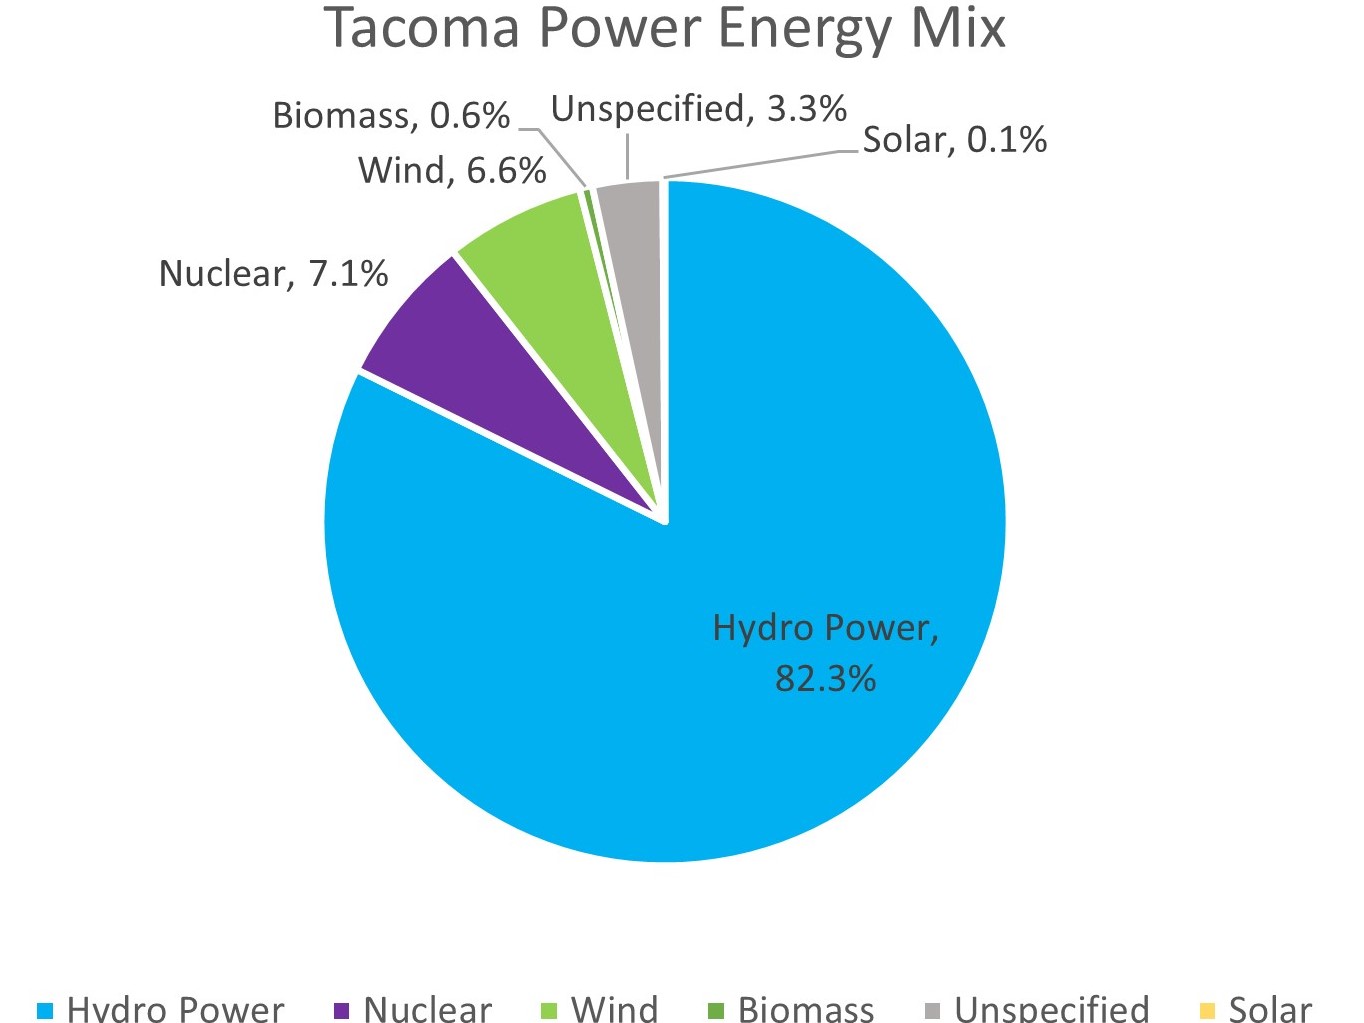 Pie chart of Tacoma power mix. 82.3% Hydro power, 7.1% Nuclear, 6.6% Wind, 0.6% Biomass, Unspecified 3.3%, and 0.1% Solar.